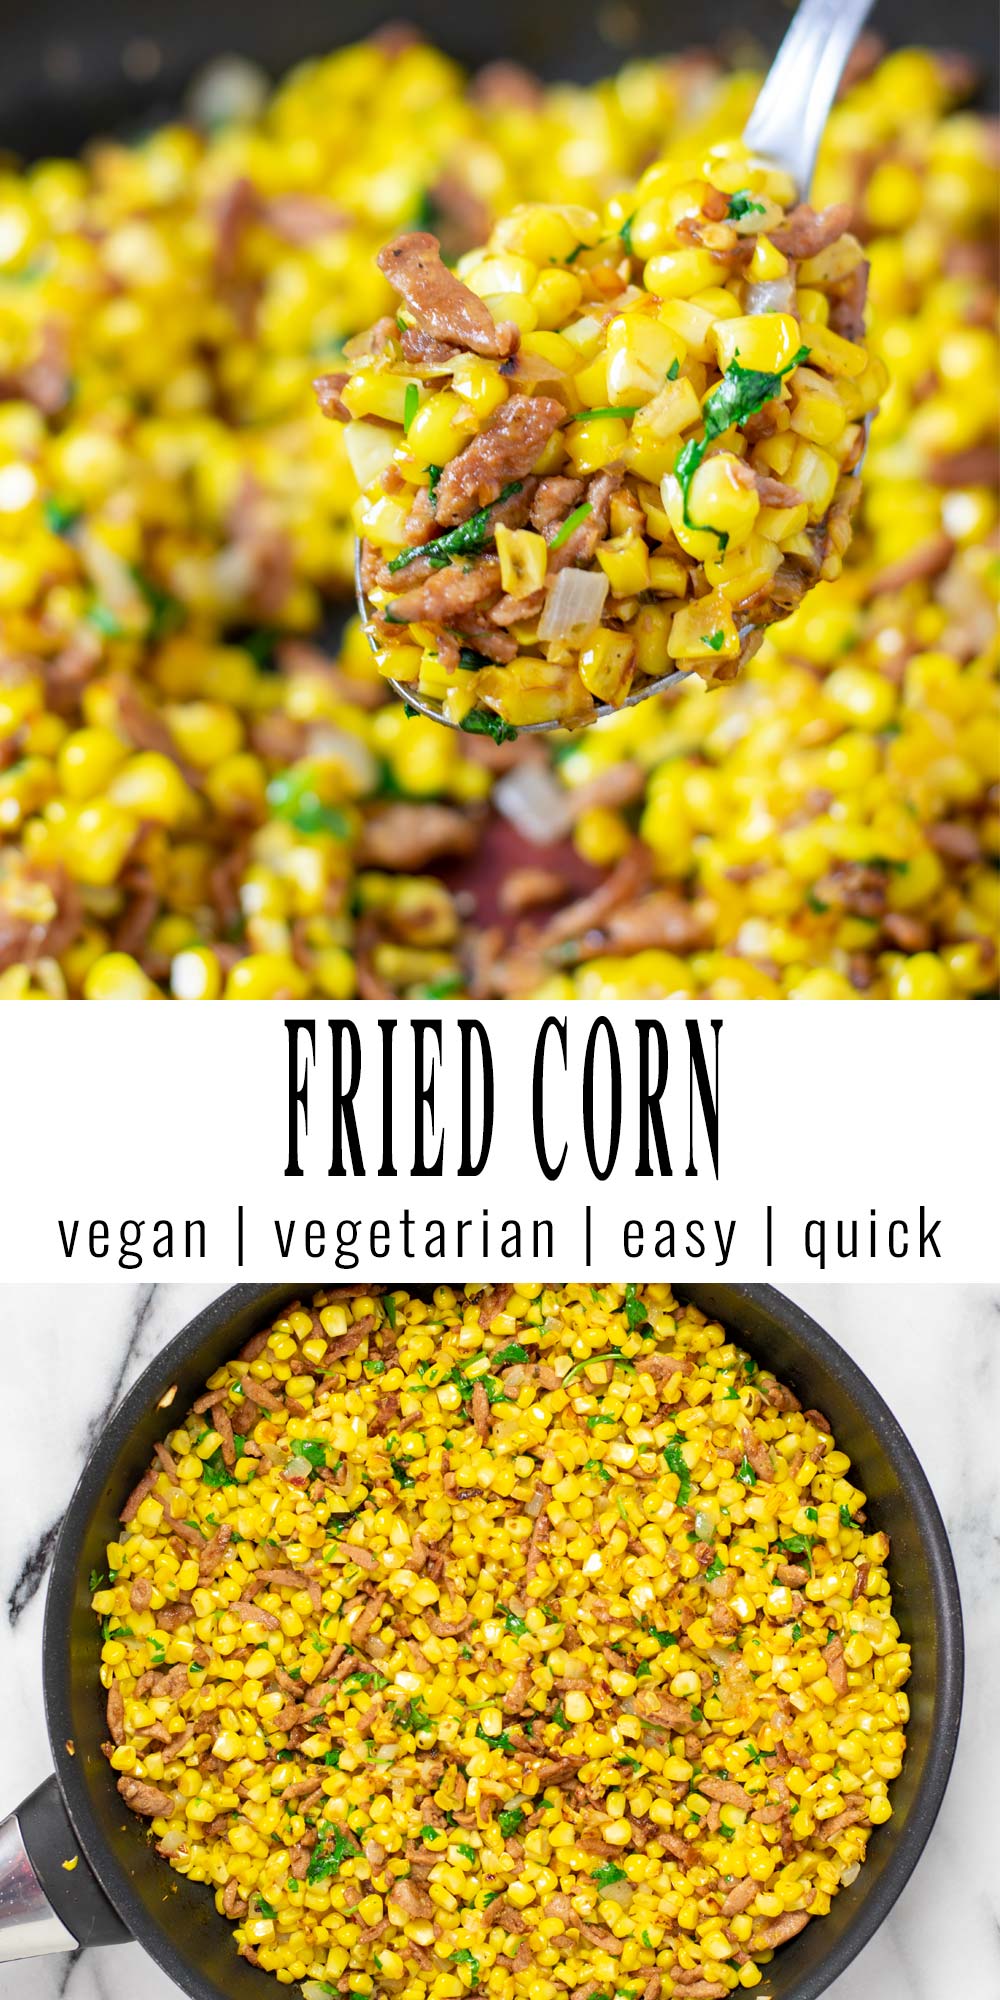 Collage of two pictures of the Fried Corn with recipe title text.